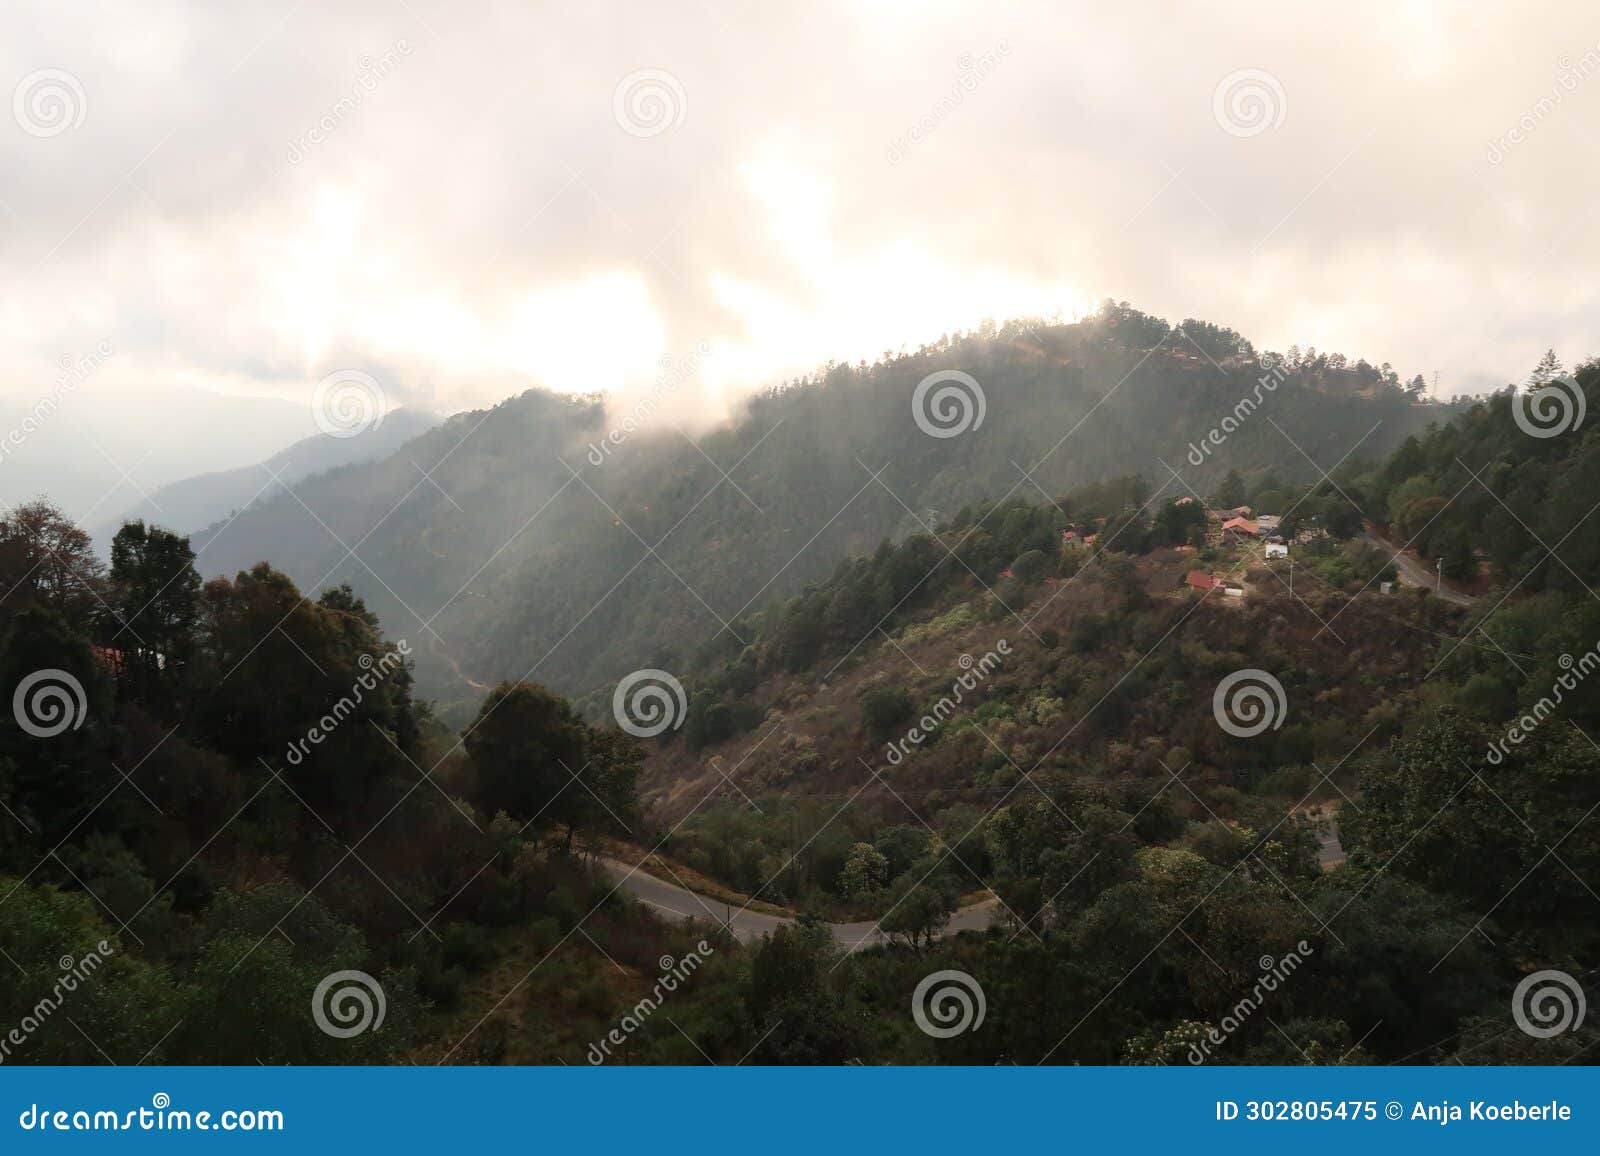 view onto the hills around san jose del pacifico before sunset when fog is coming up, oaxaca, mexico